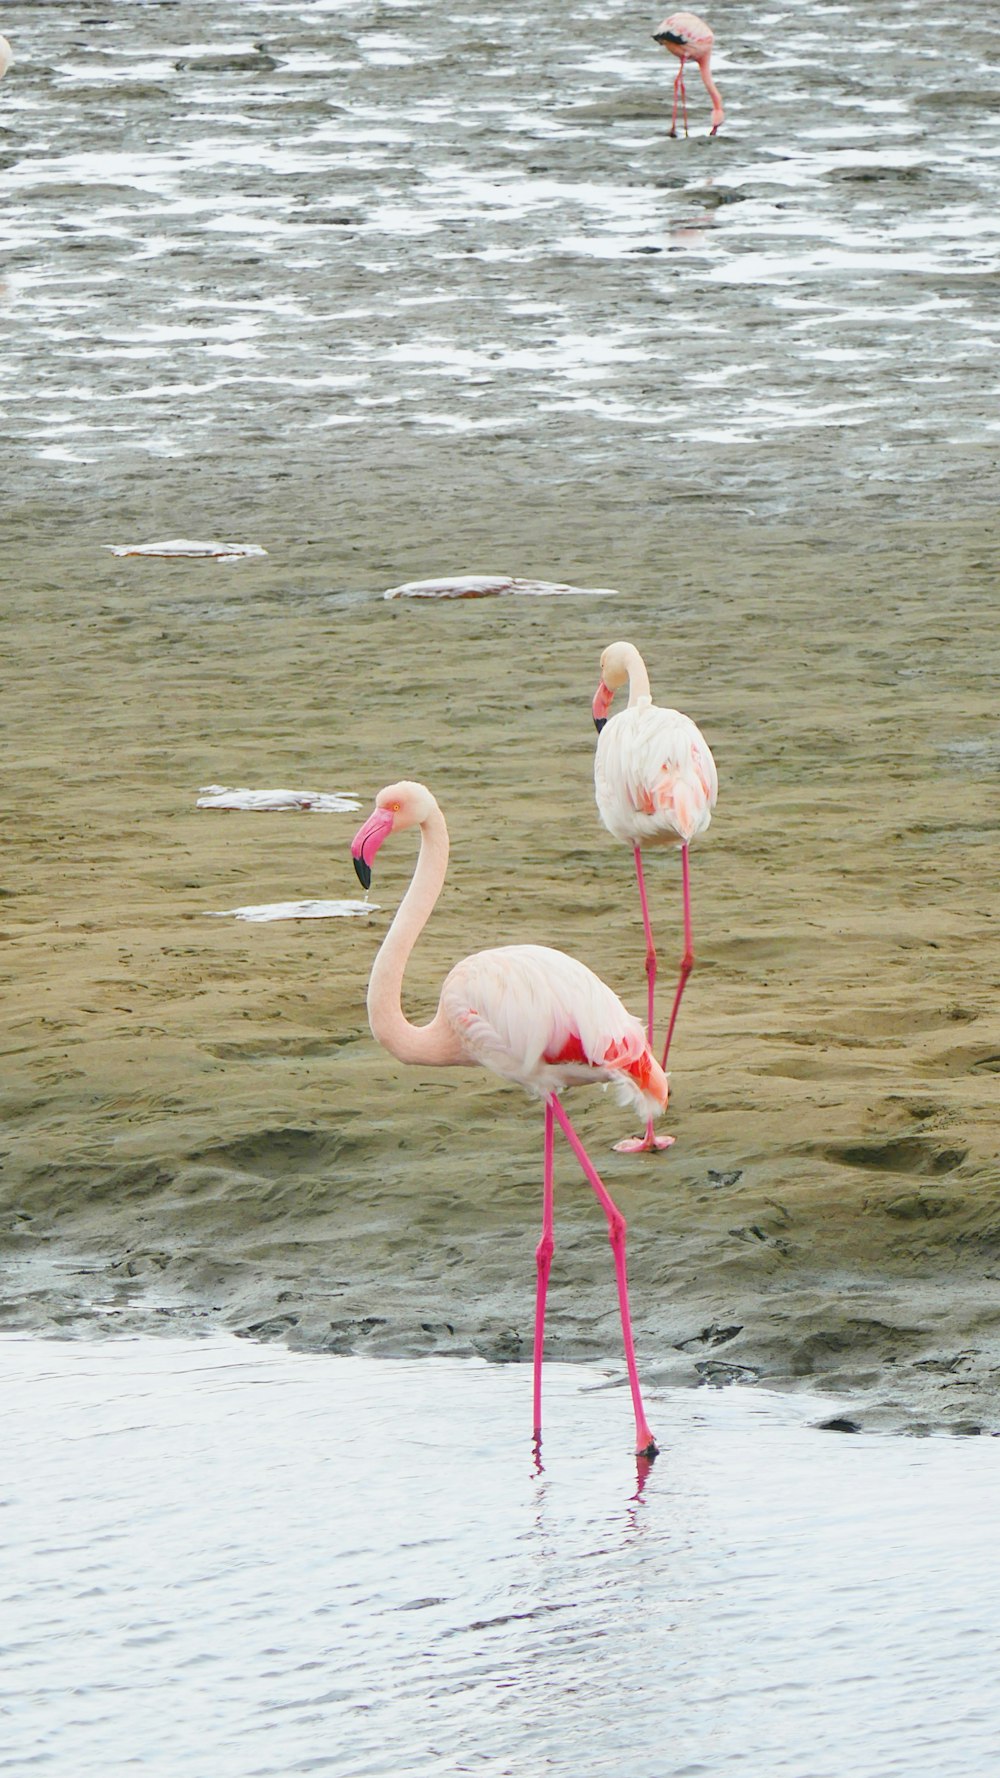 three flamingos are standing in the water at the beach